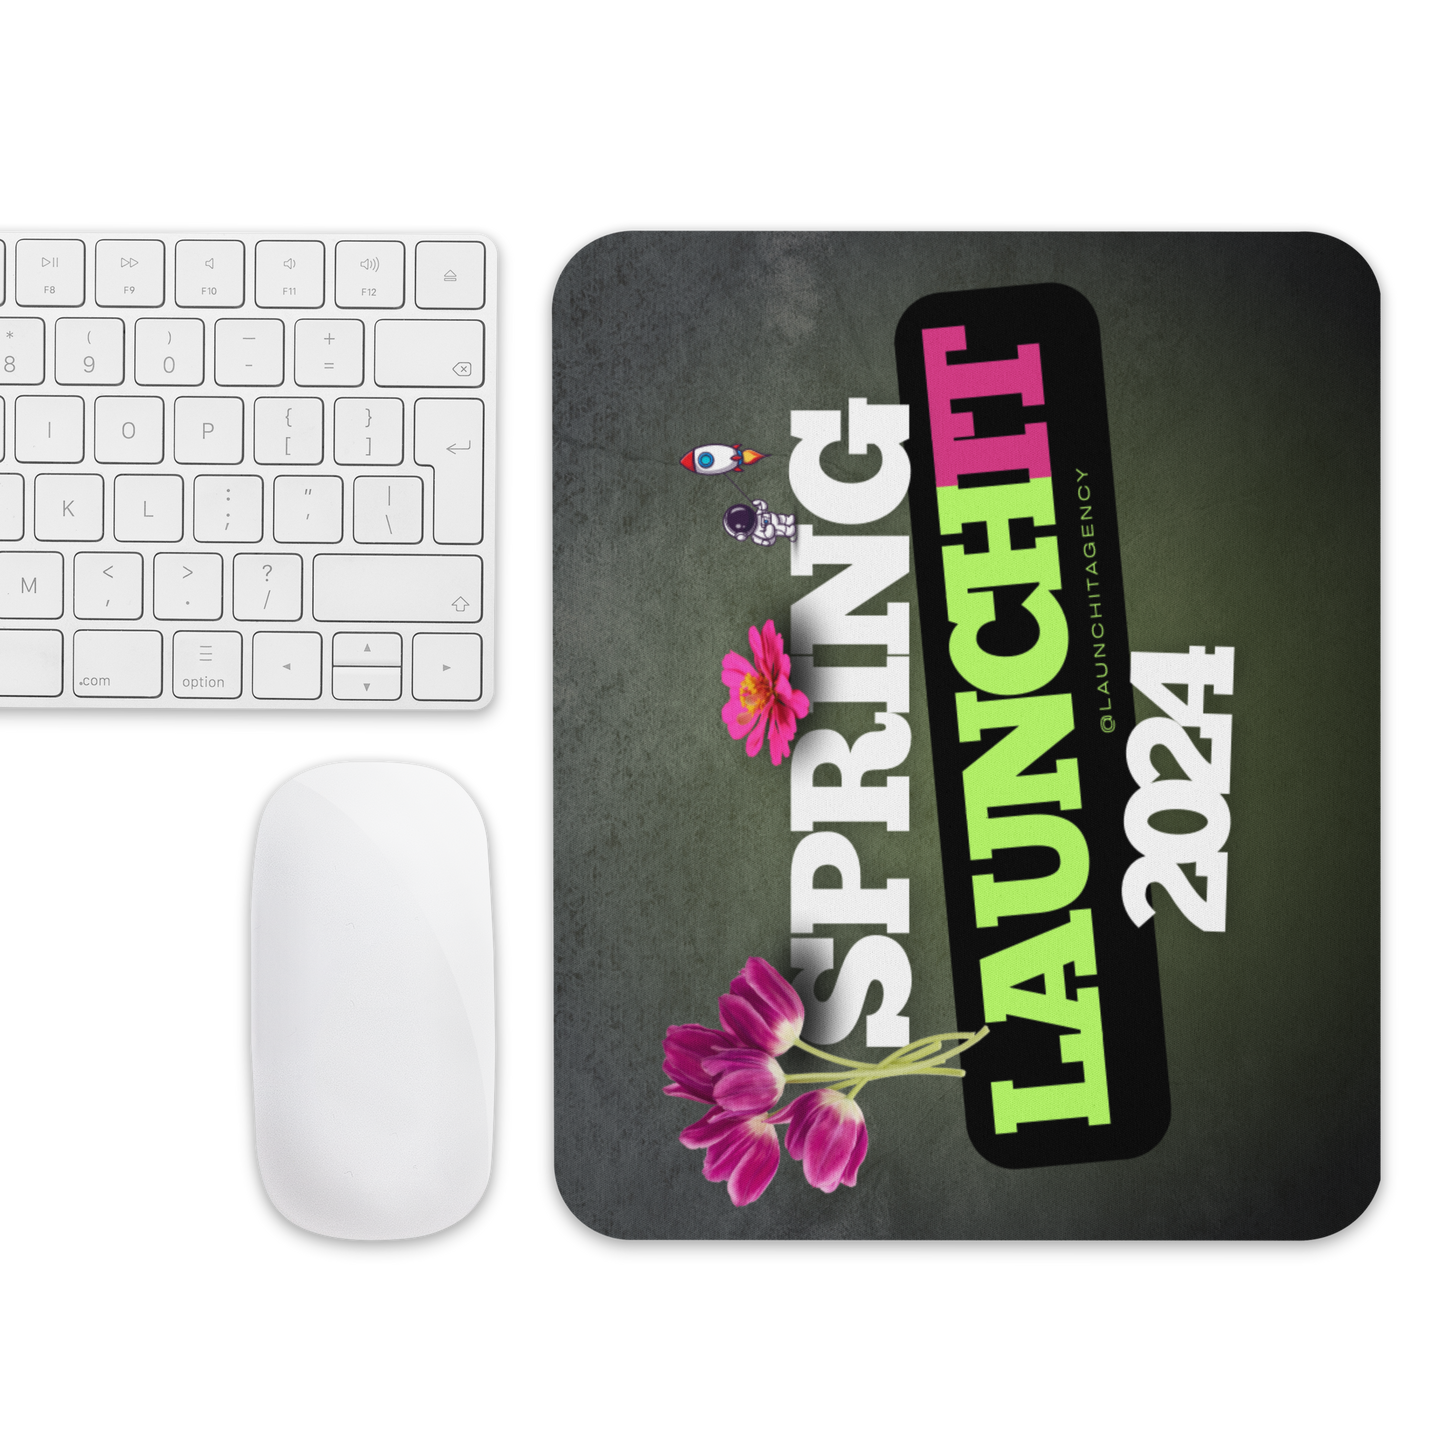 Launch It Spring 2024 Mouse pad